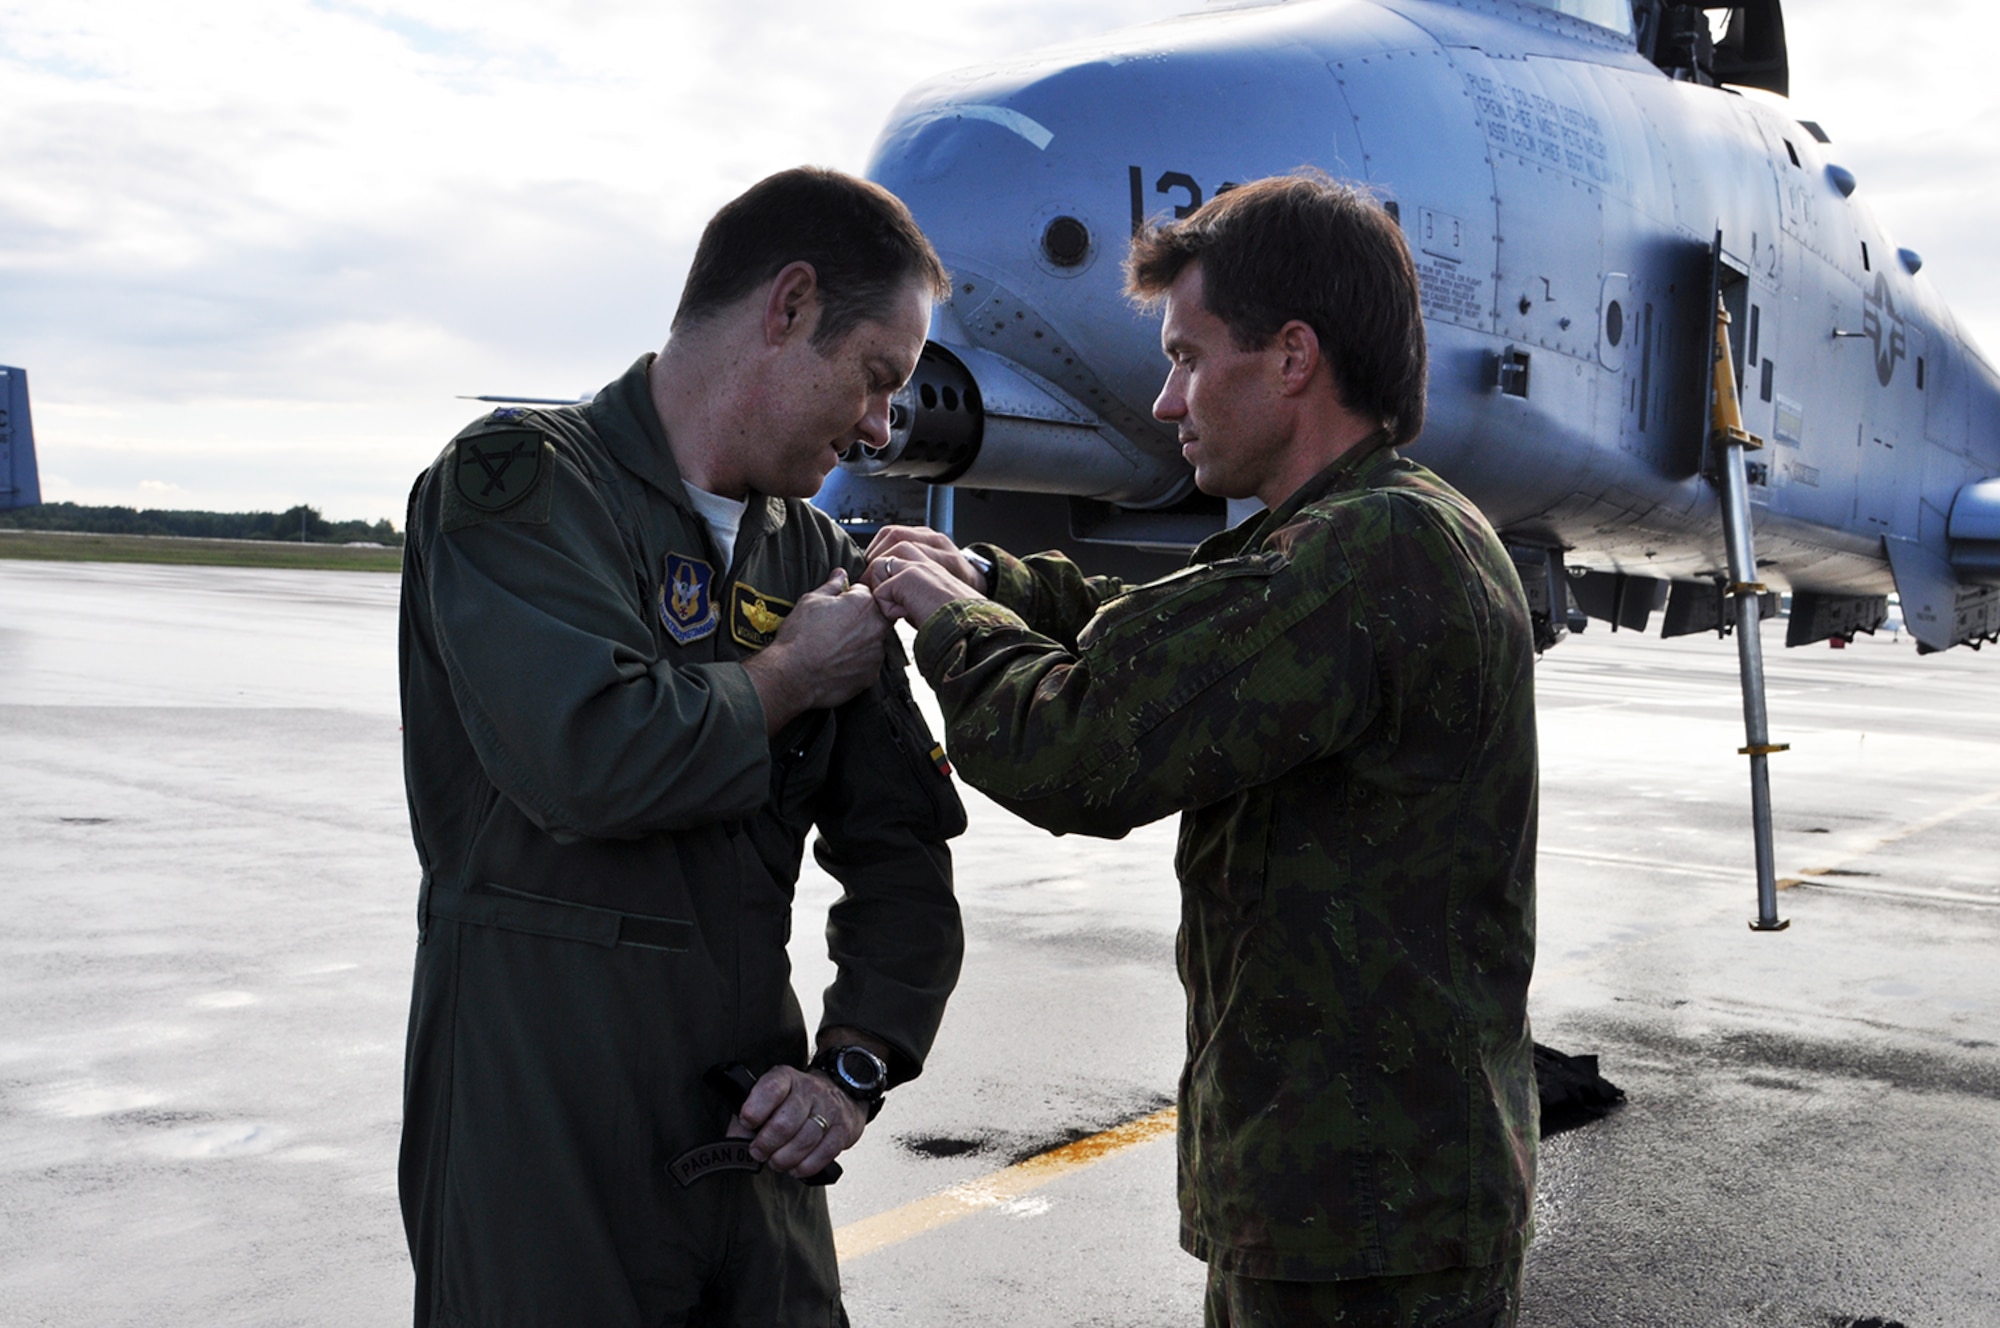 A-10 Thunderbolt II pilot, Lt. Col. Michael Leonas, 303d Fighter Squadron, exchanges uniform patches with Capt. Darius Kaleda of the Lithuanian Air Force at Kaunas Airport in Lithuania Sept. 9. Leonas flew in as part of Operation Atlantic Resolve where the U.S. is partnering and strengthening their relationship with European NATO allies. (U.S. Air Force photo by Capt. Denise Haeussler)